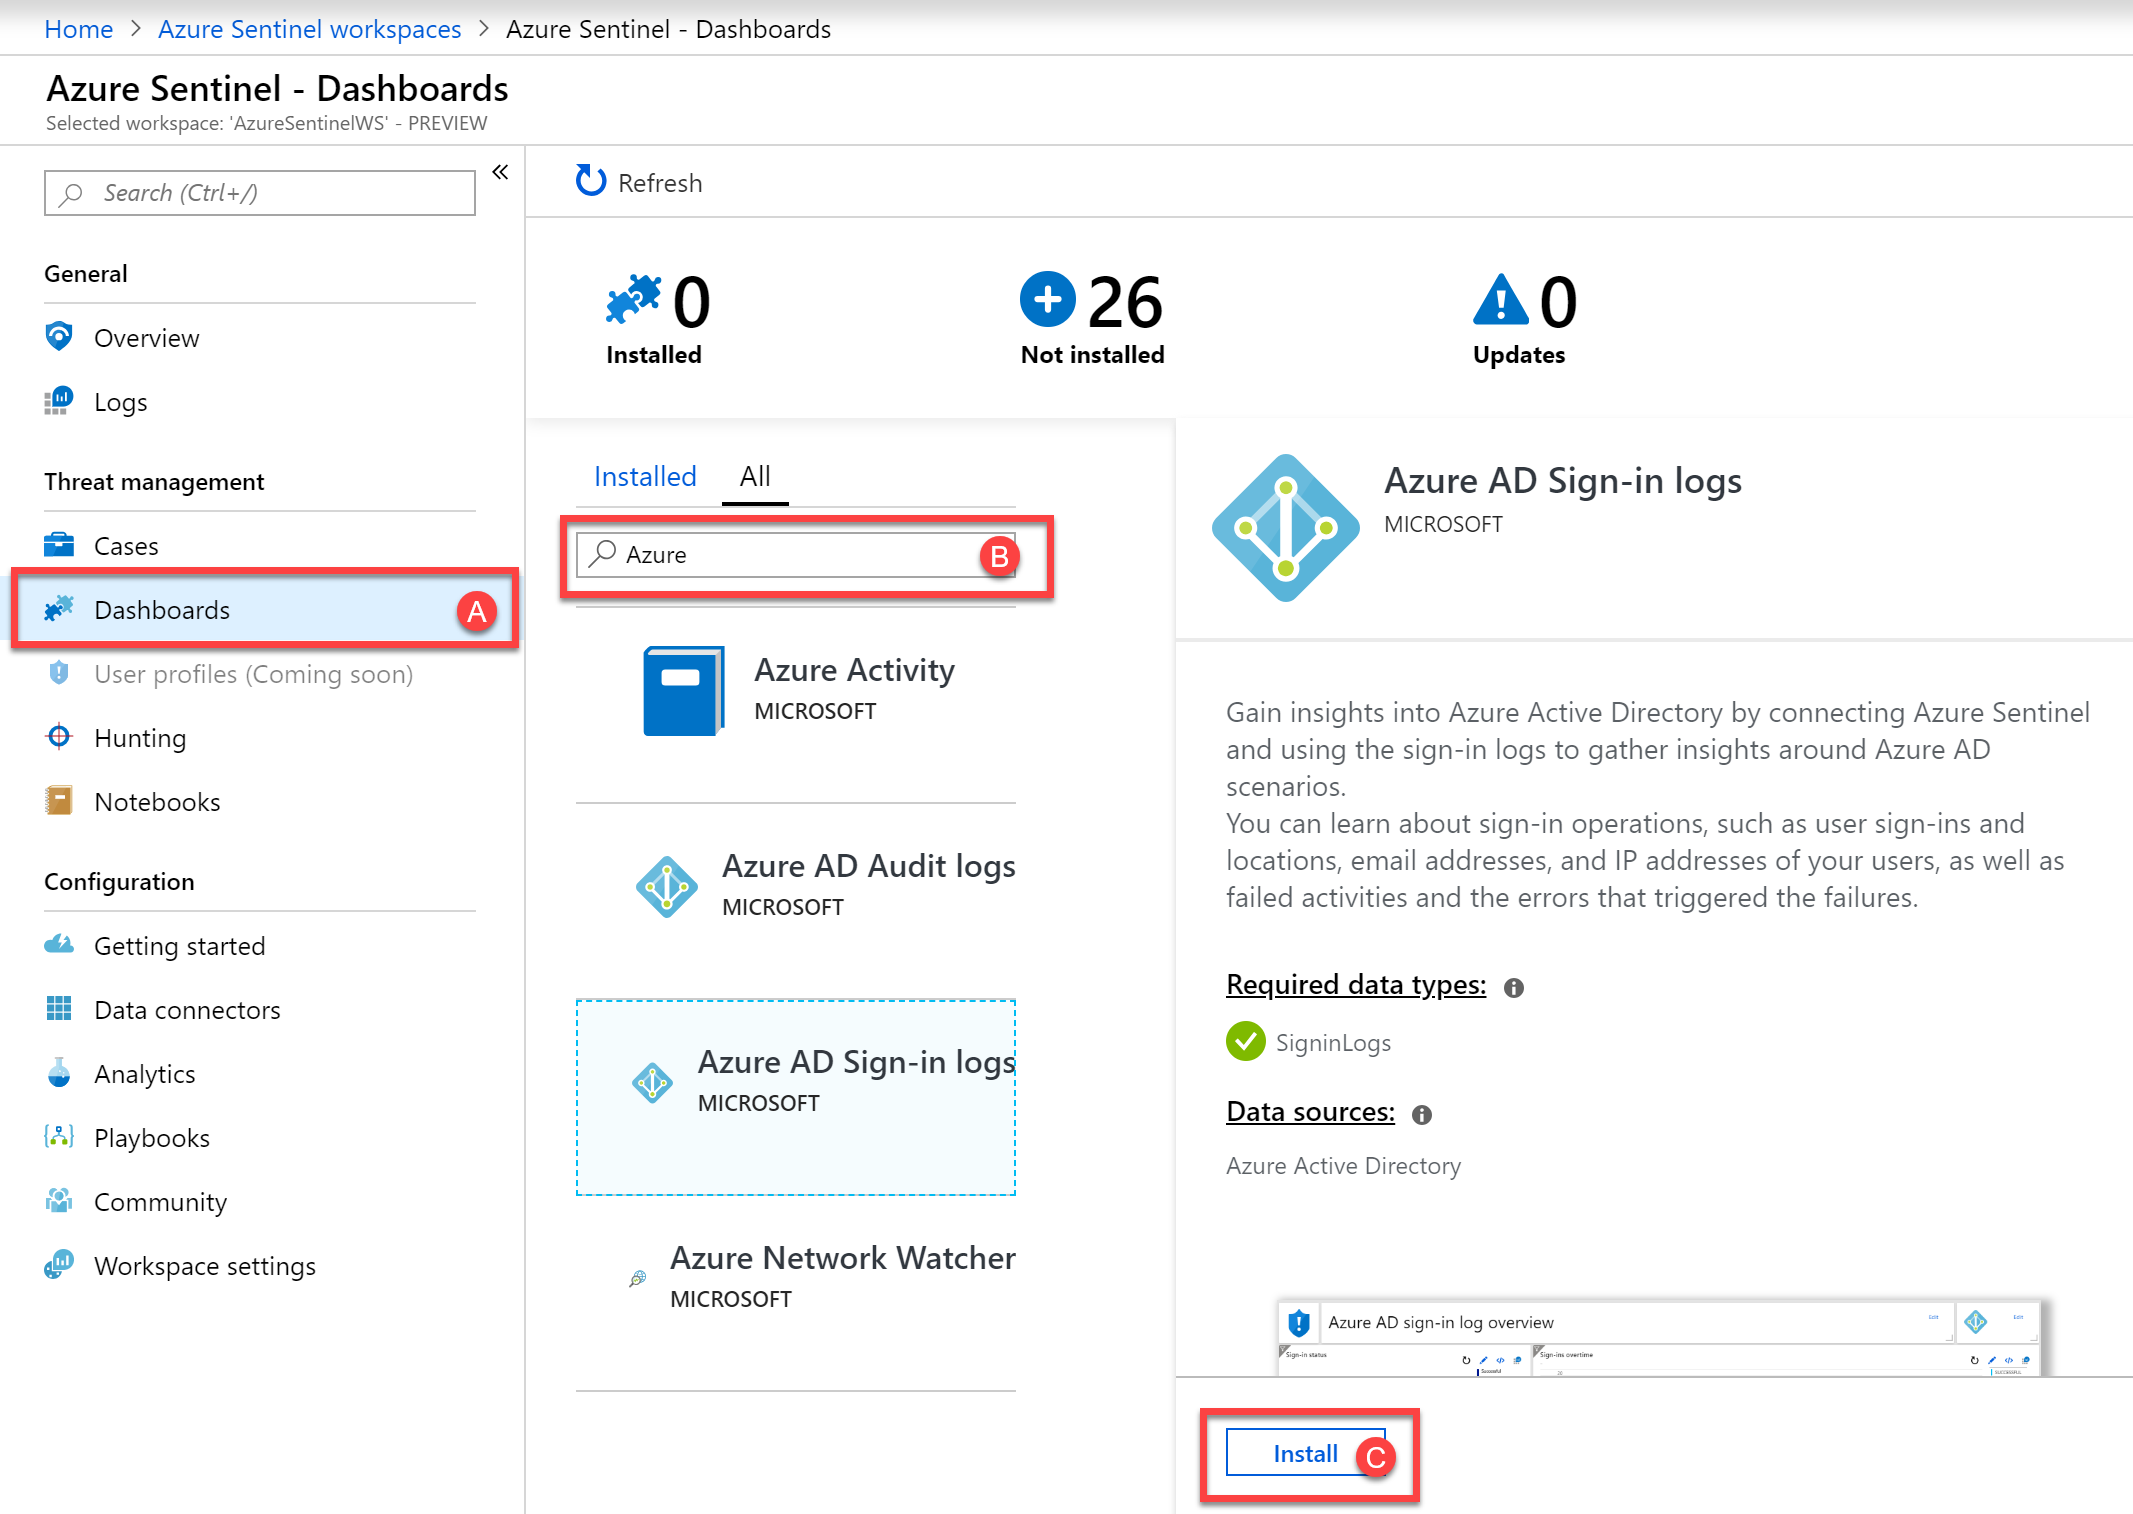 Install the relevant Azure Sentinel Dashboards